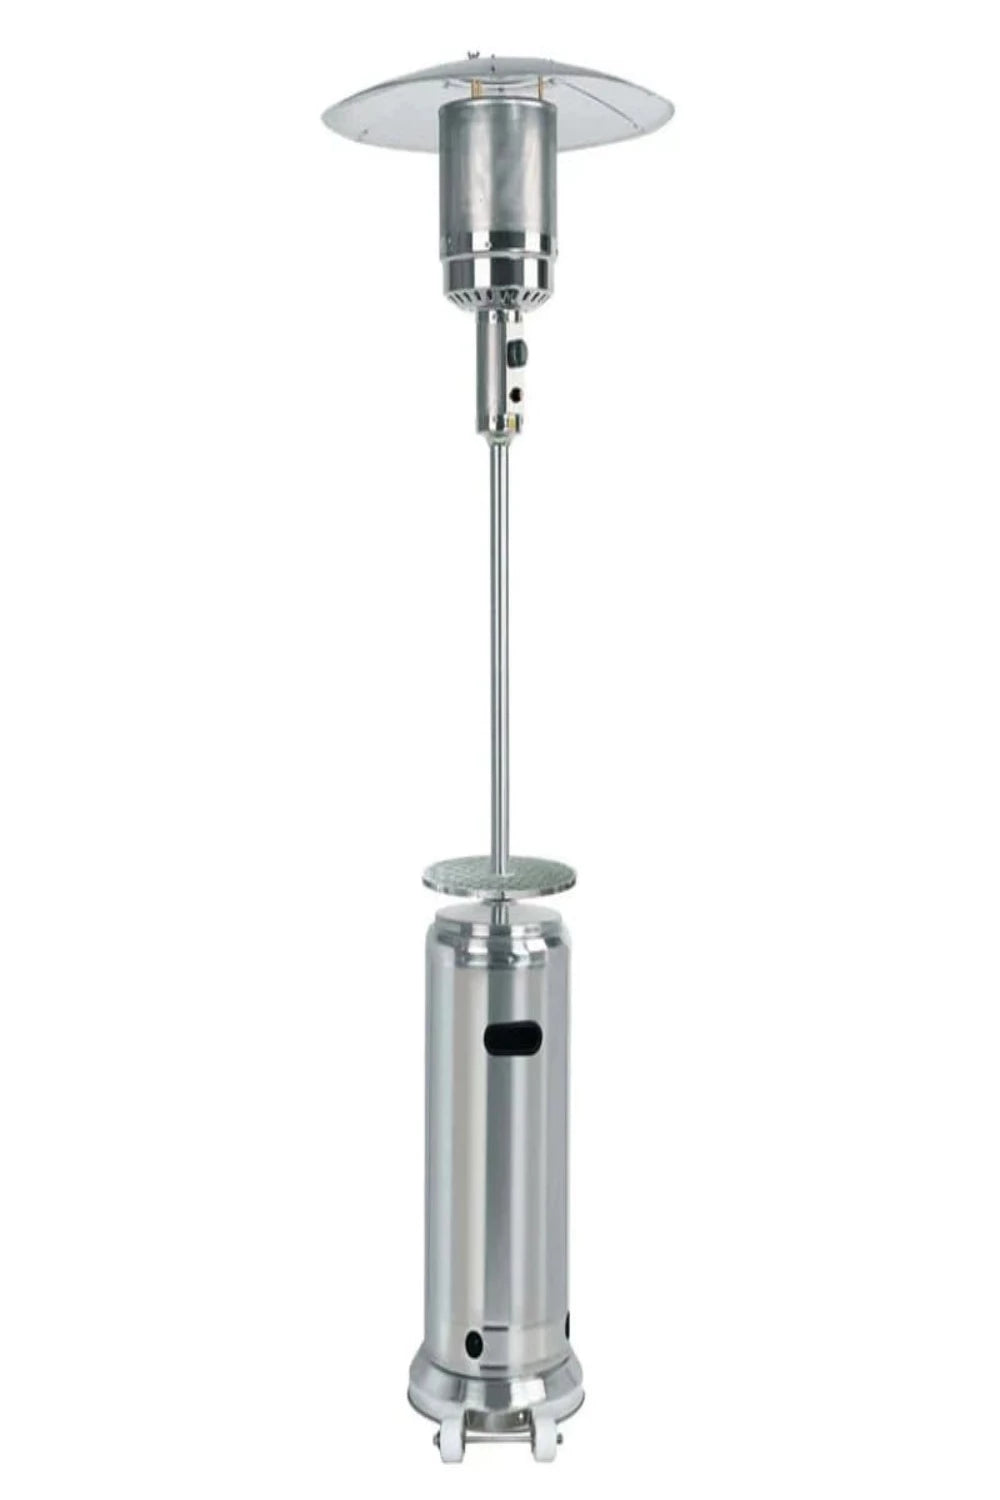 Hiland 87" Tall Outdoor Patio Heater with Metal Table - Stainless Steel - HLDS01-BS - Main View